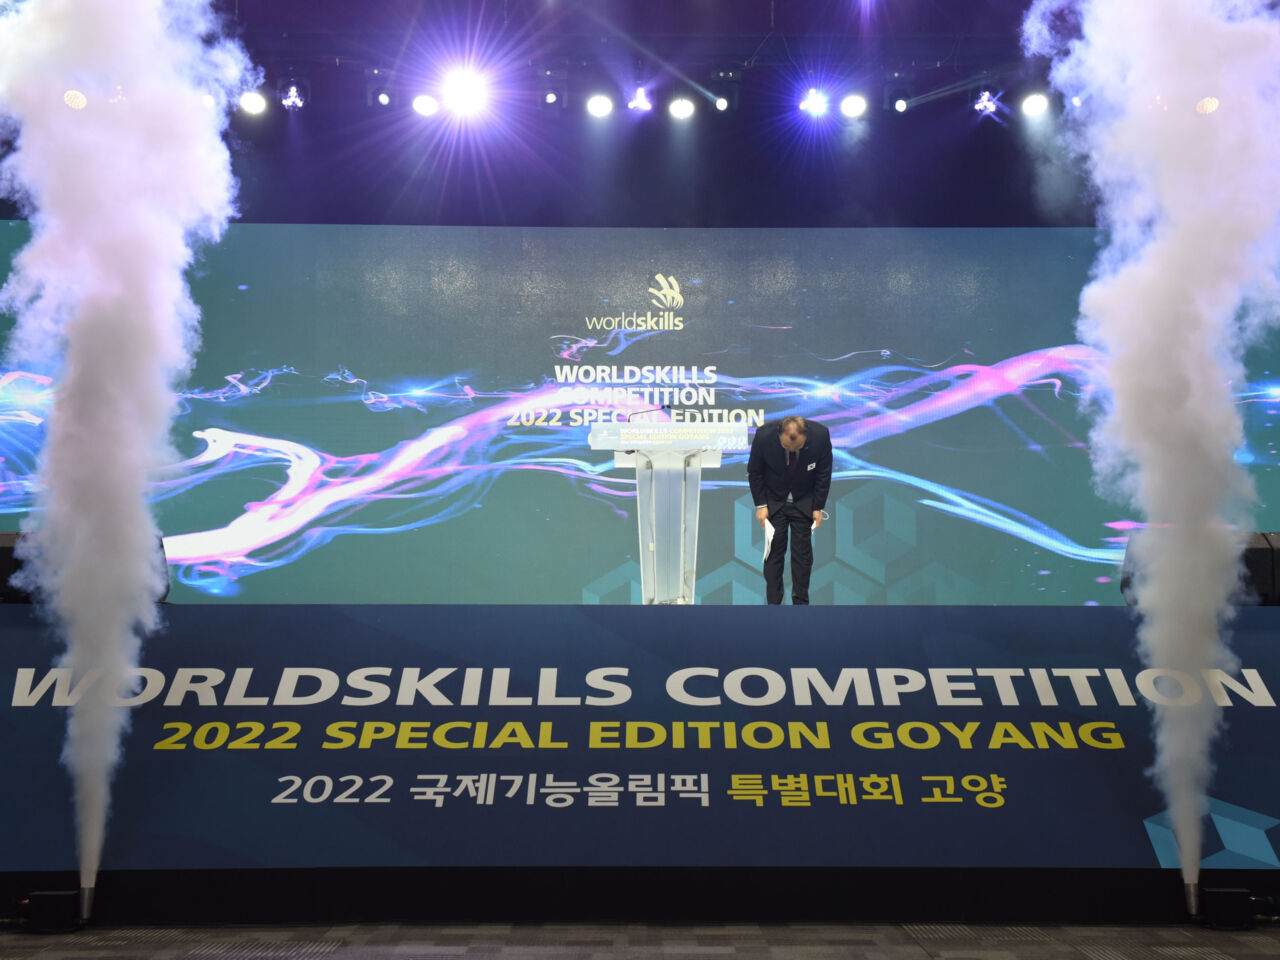 The Opening Ceremony of WorldSkills Competition 2022 Special Edition at the Kintex Exhibition Hall in Goyang, Korea.
